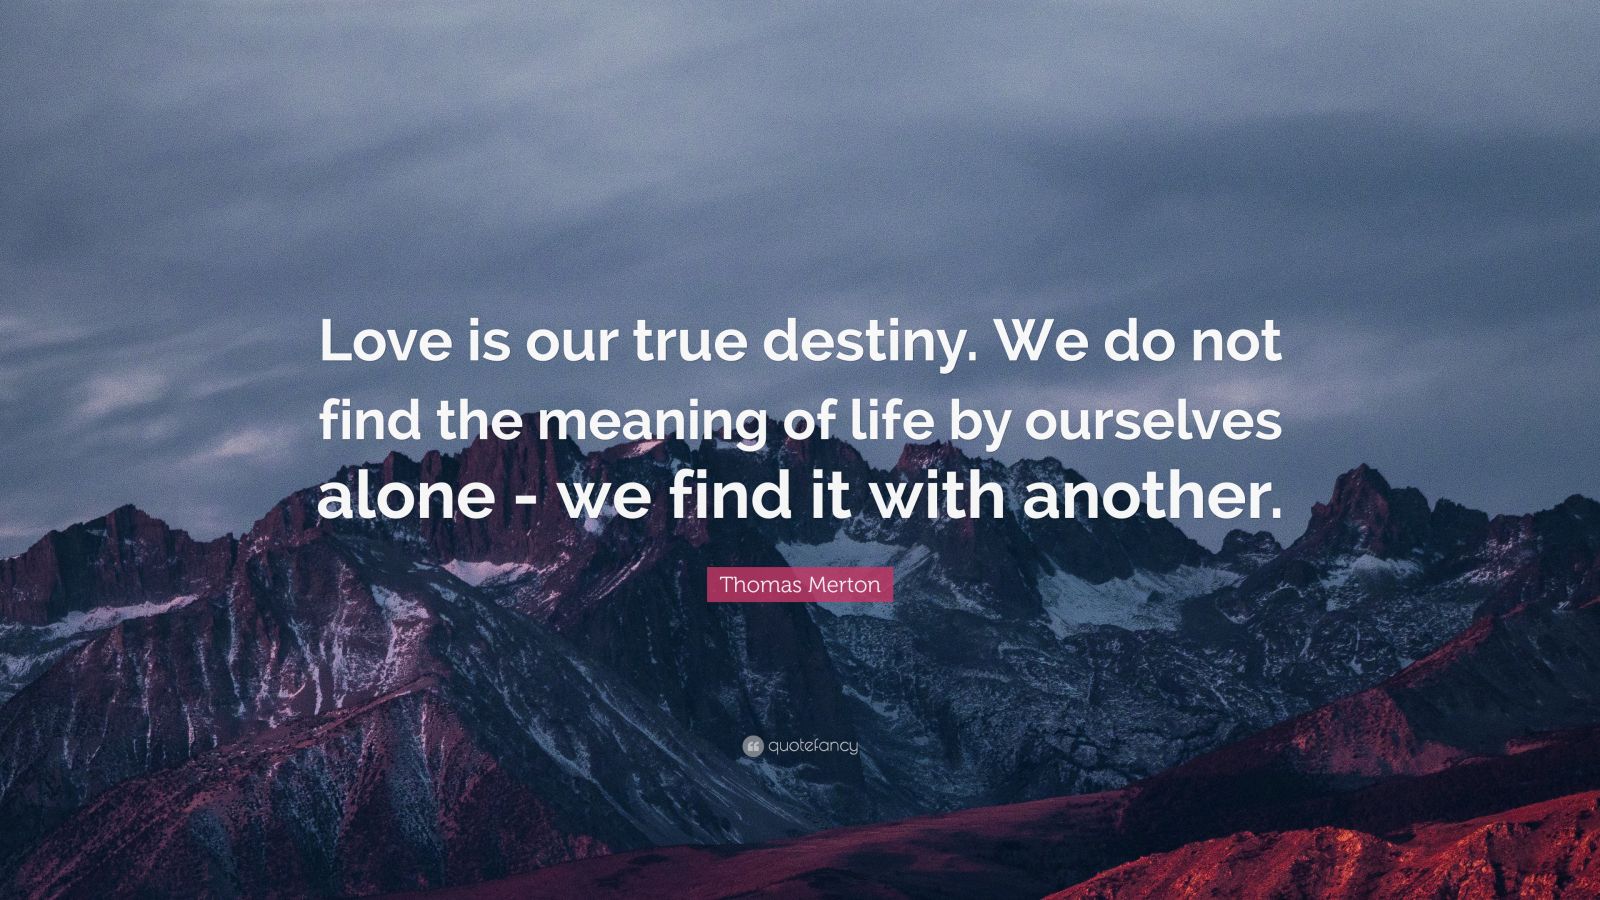 Thomas Merton Quote: “Love is our true destiny. We do not find the ...